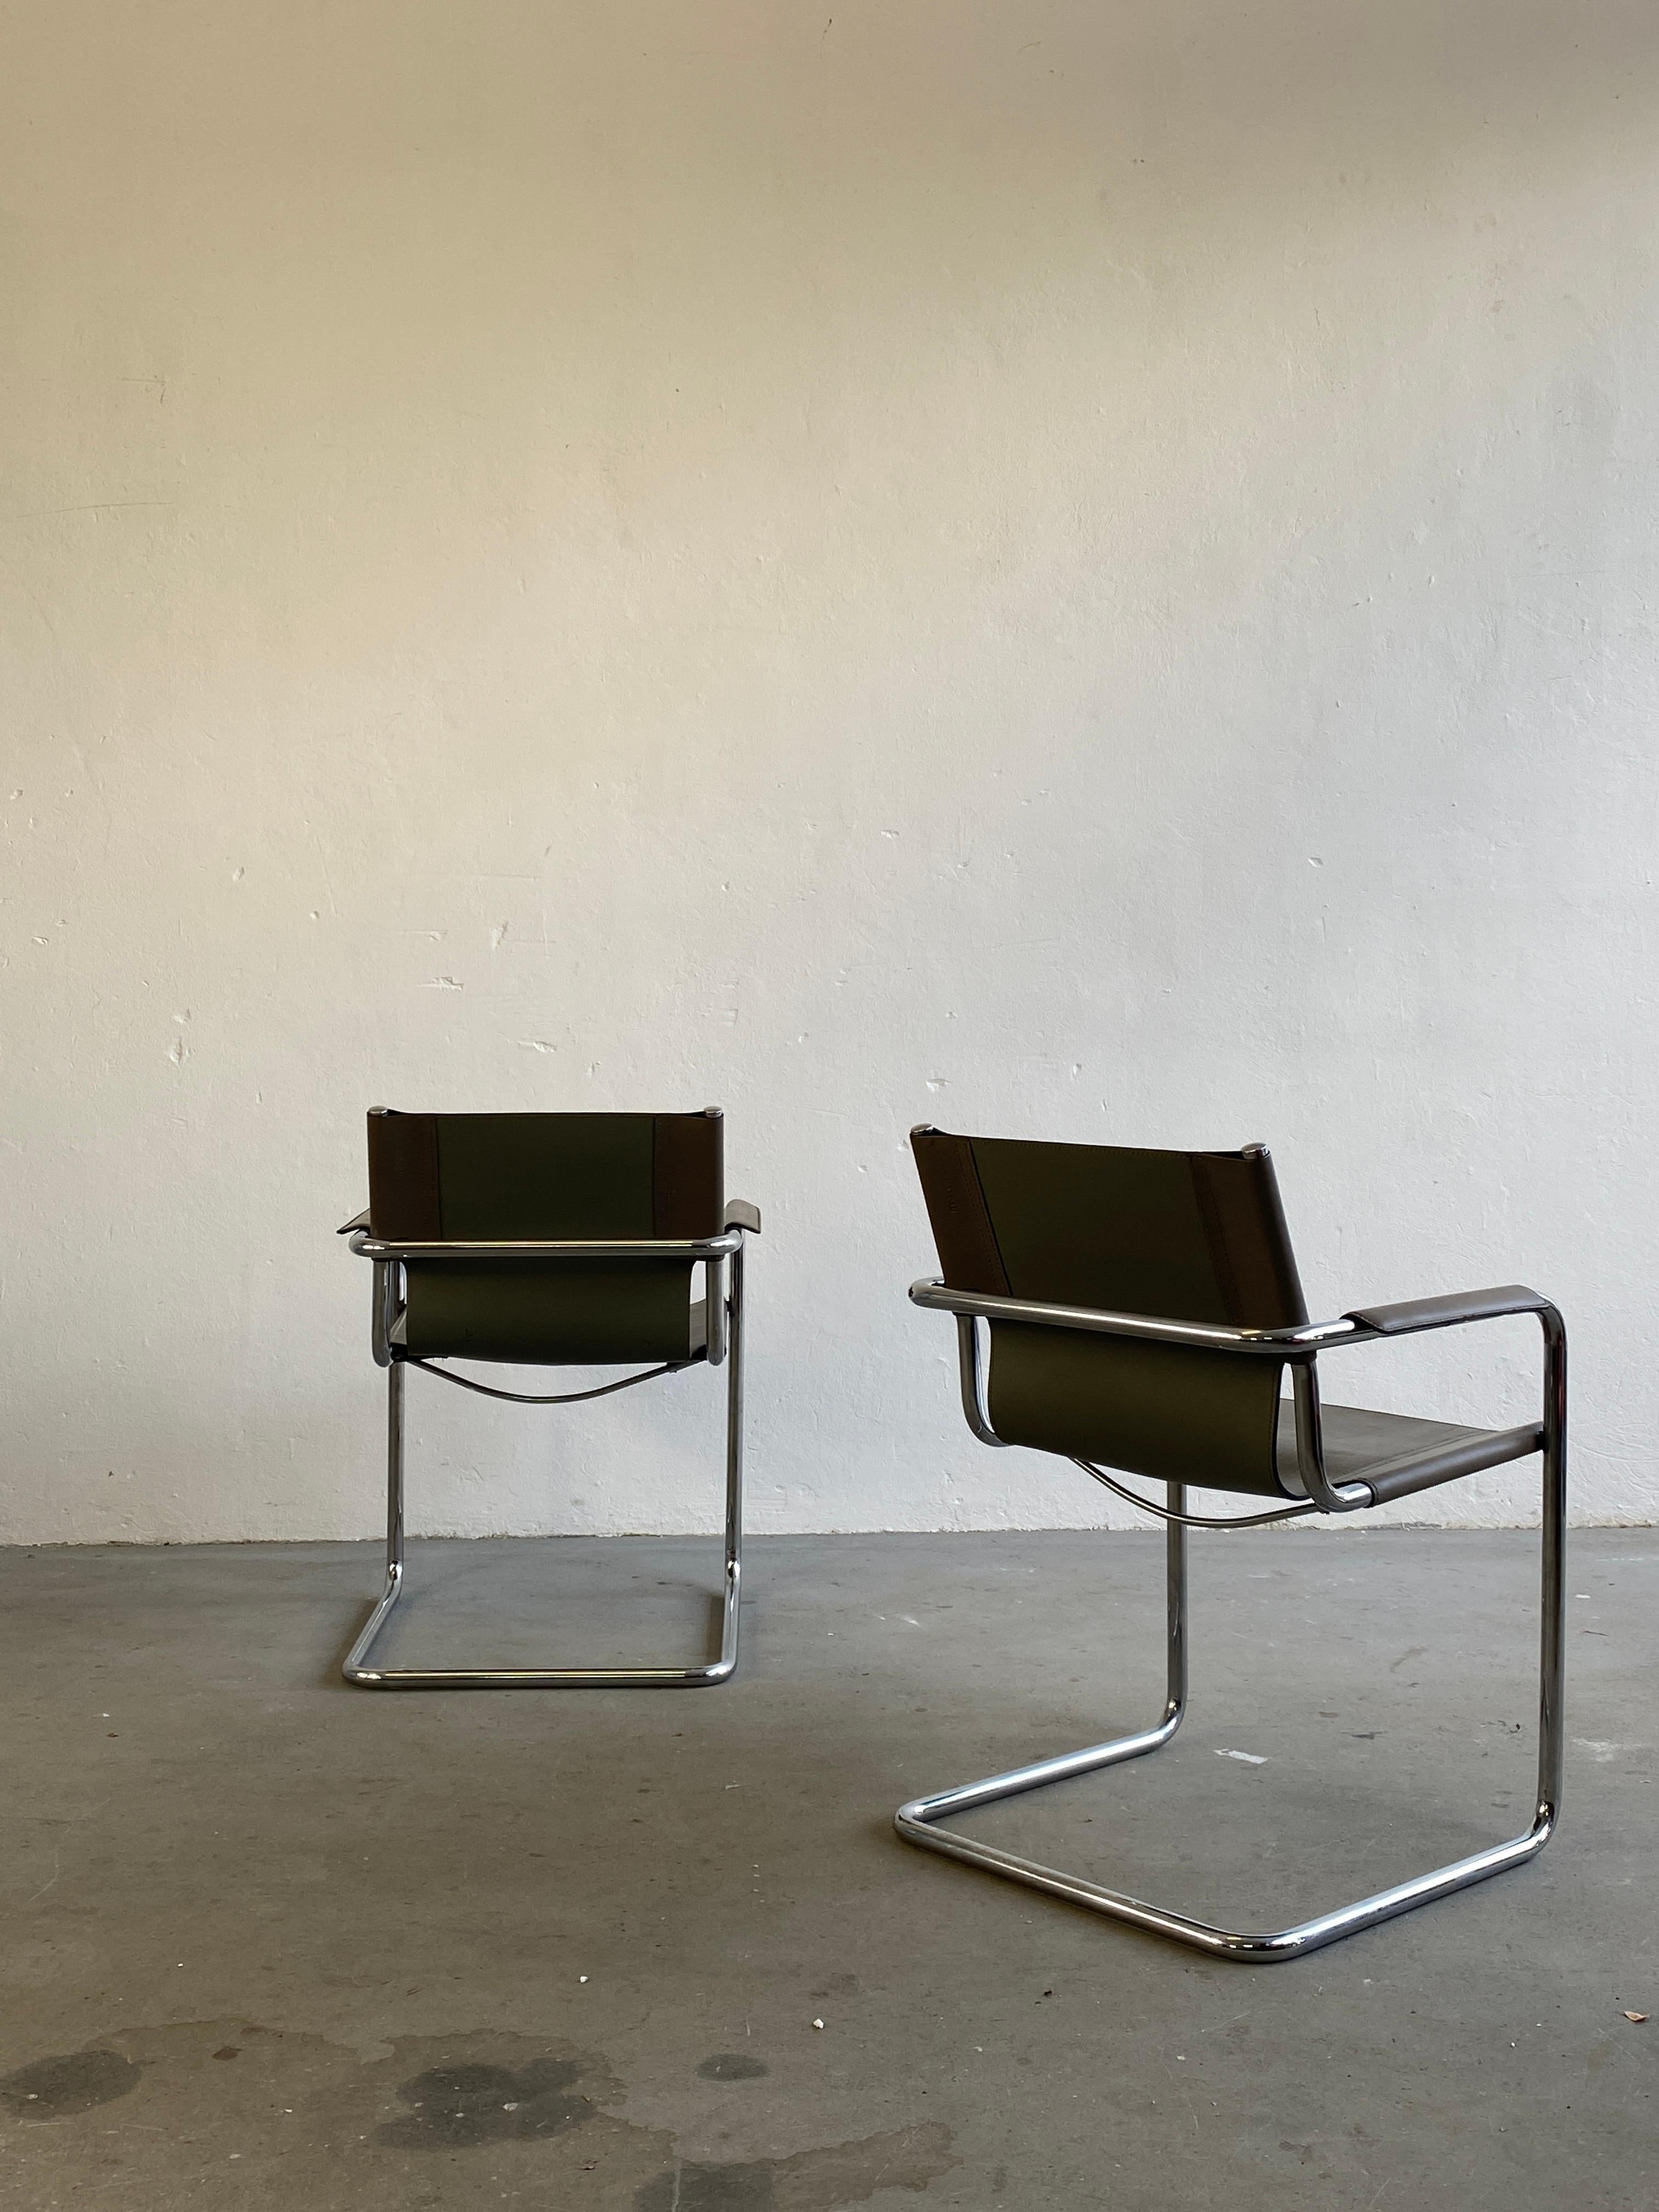 Vintage Leather Cantilever Chairs, Centro Studi for Matteo Grassi, 1980s Italy 7